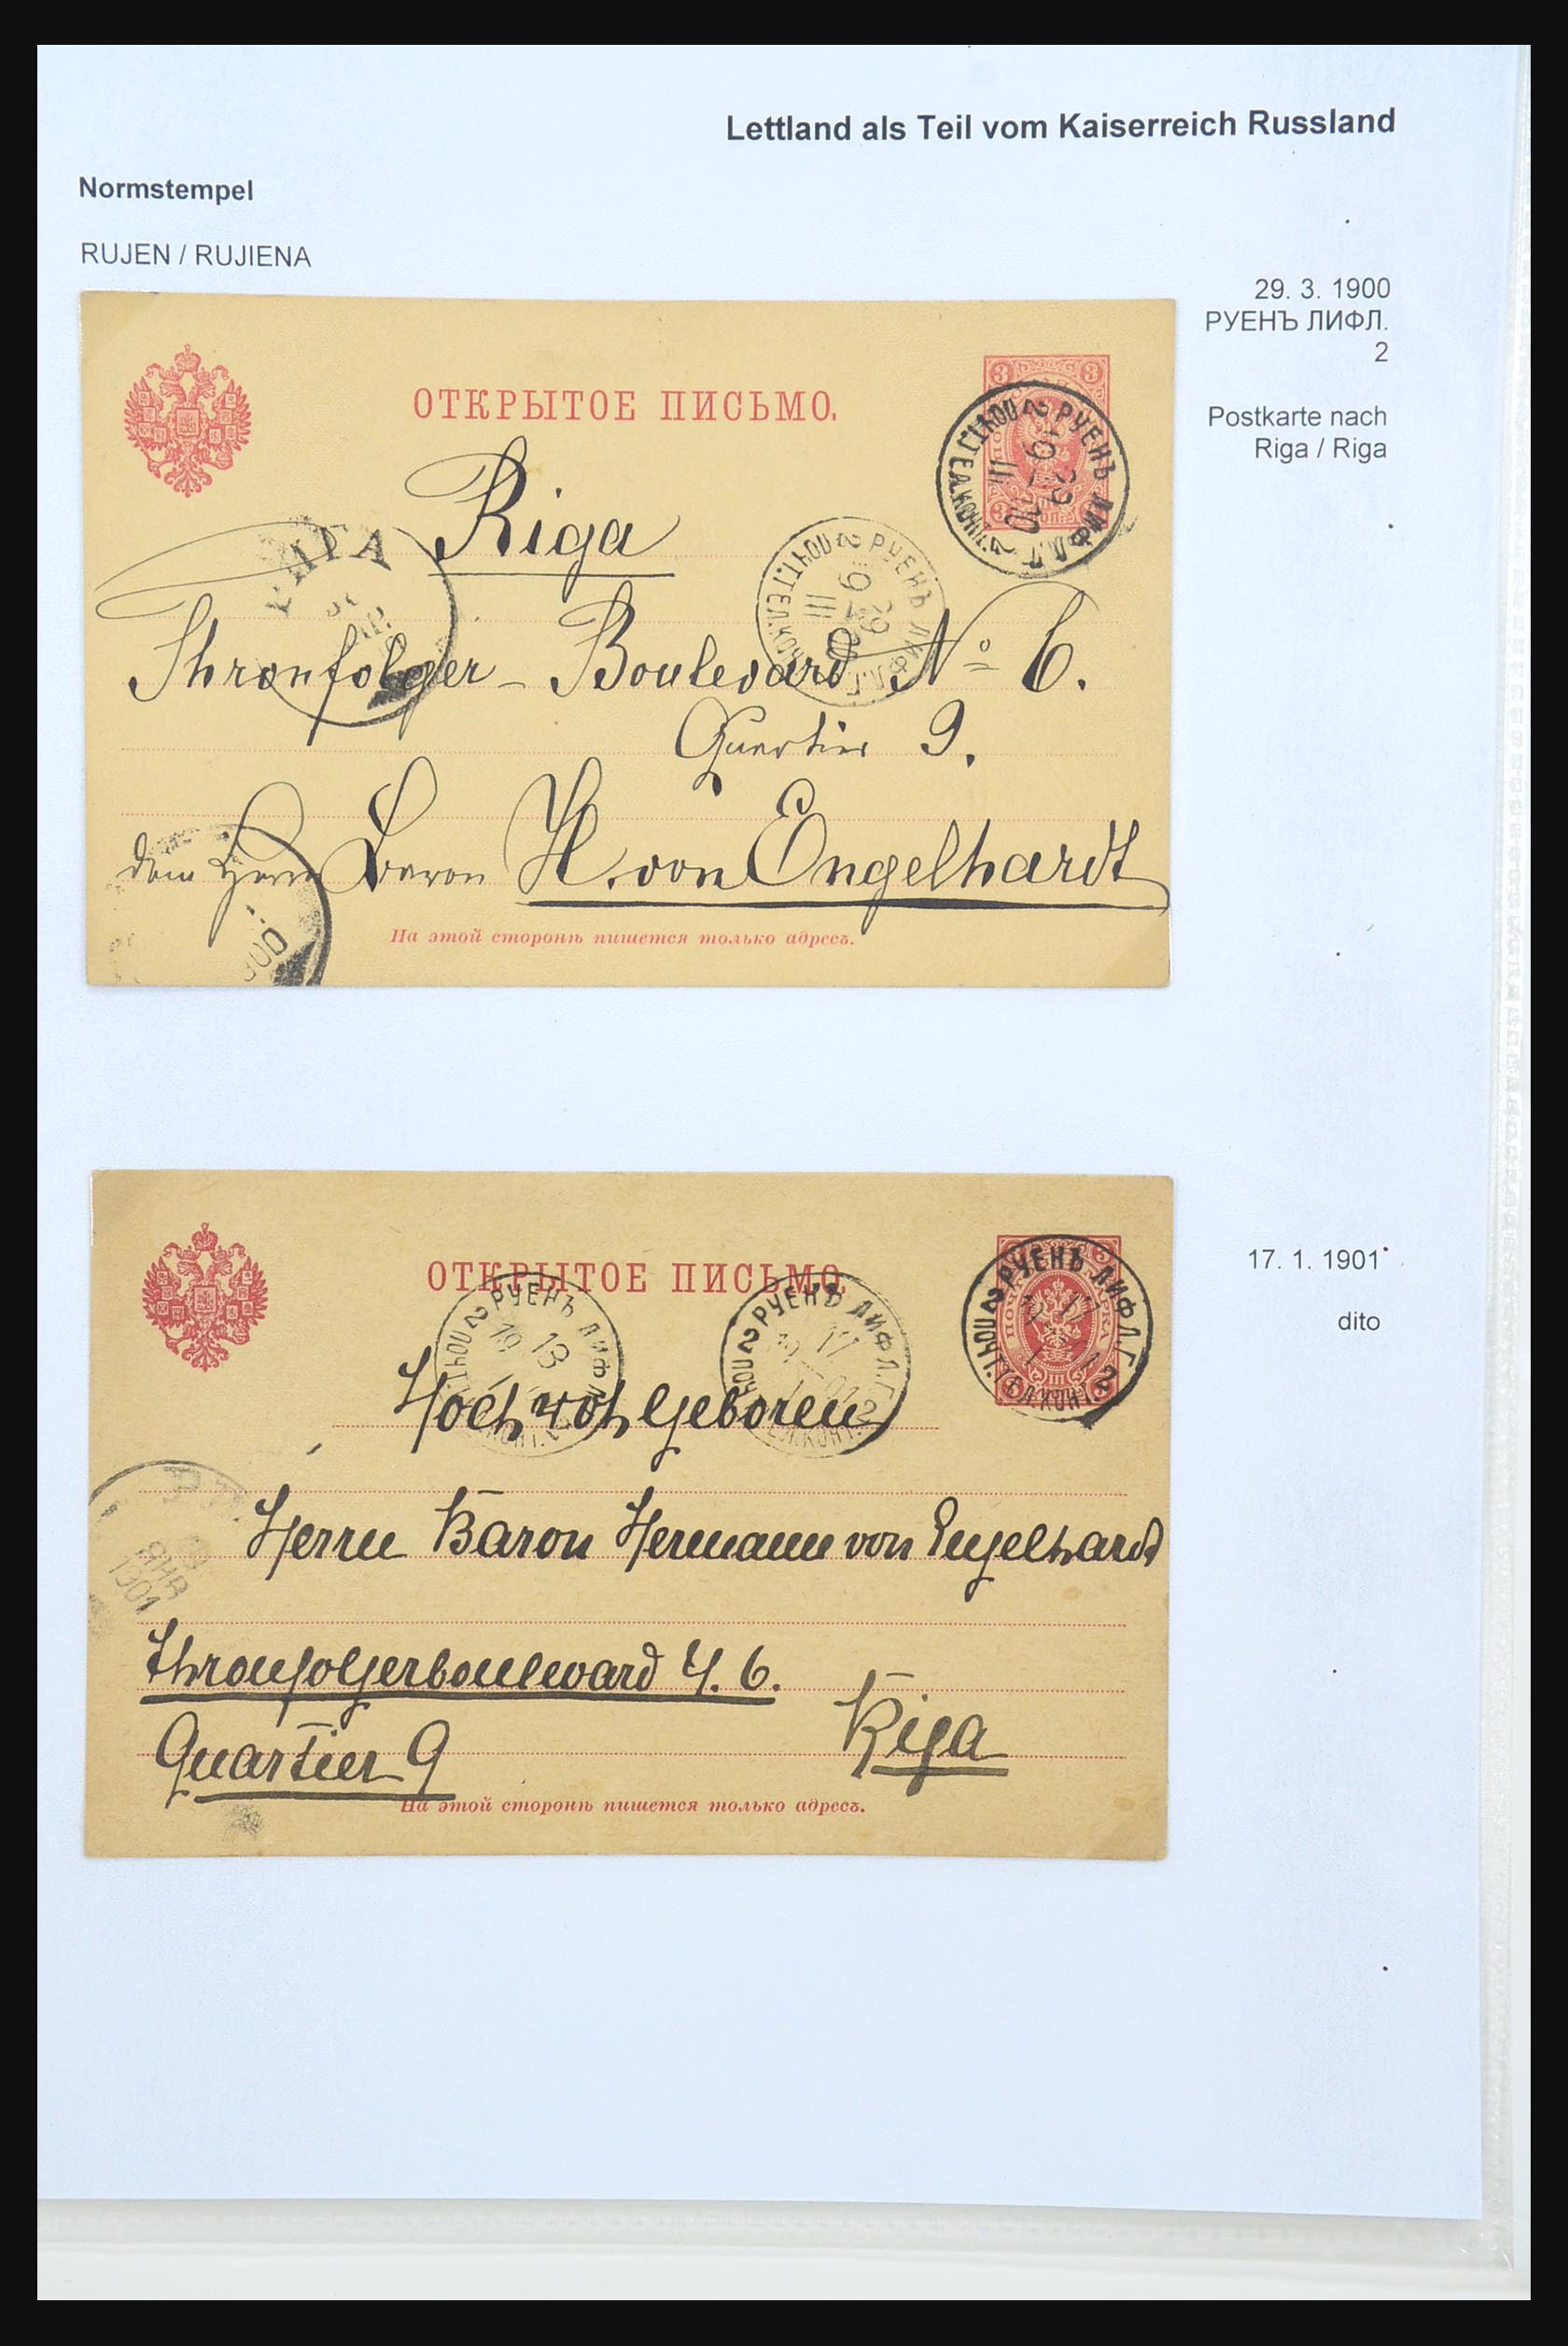 31305 093 - 31305 Latvia as part of Russia 1817-1918.